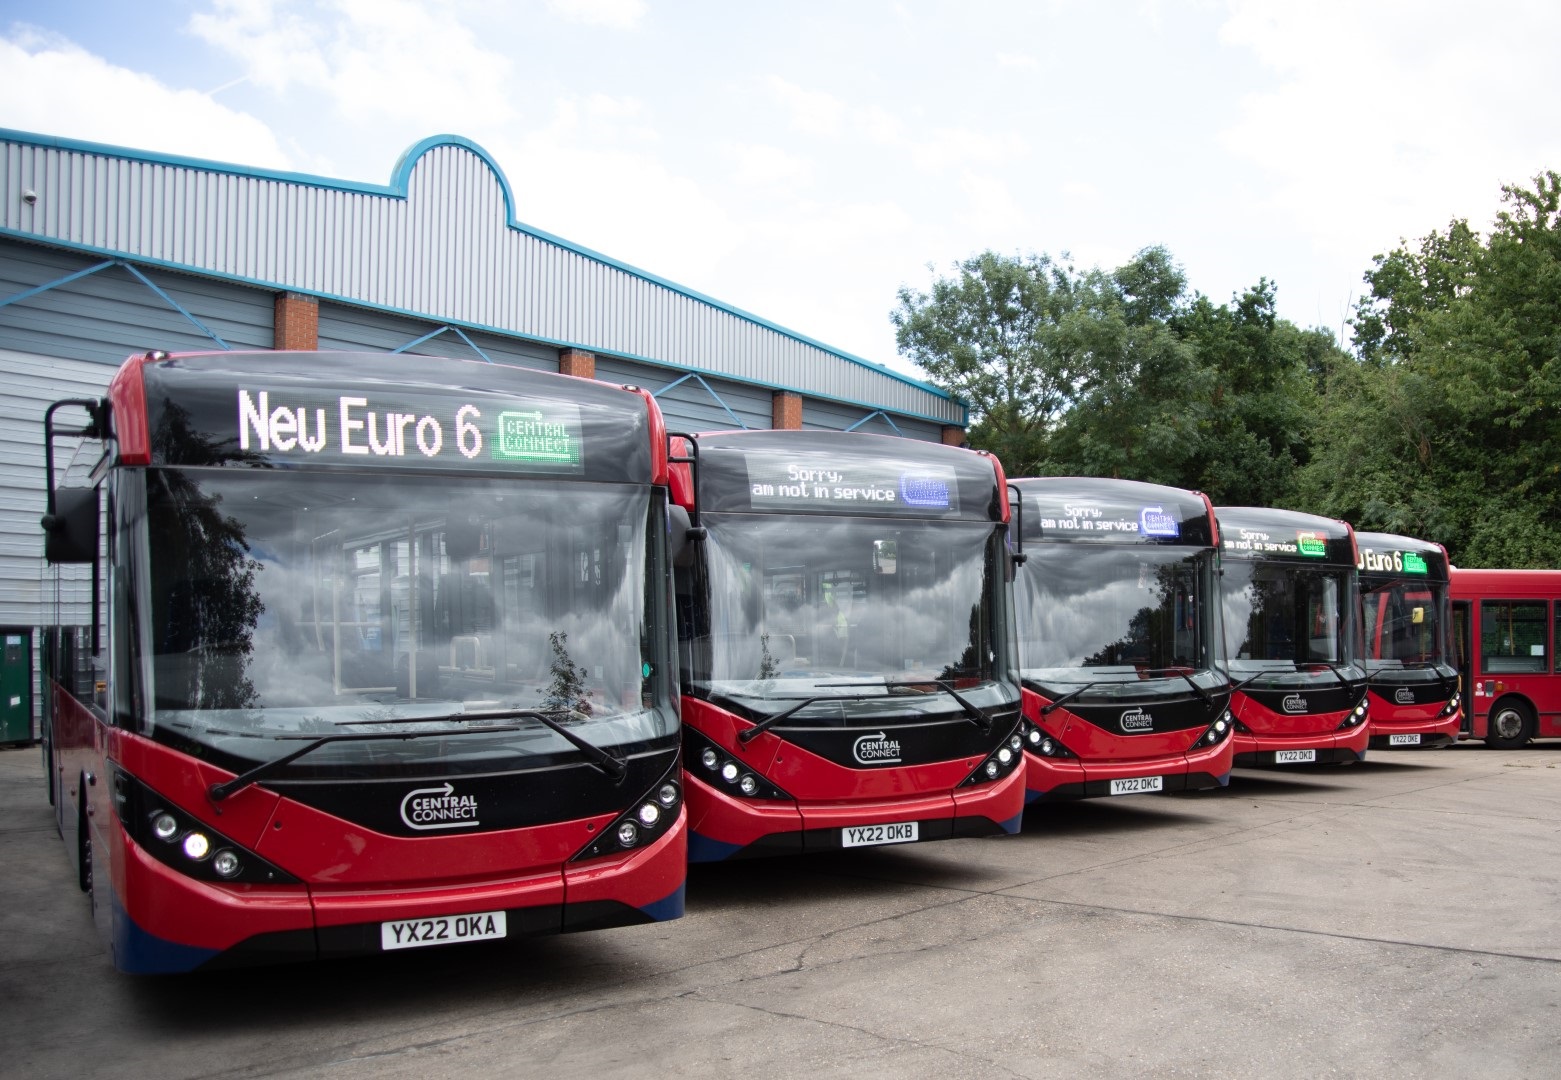 Galleon Travel Enviro200 delivery for Central Connect brans